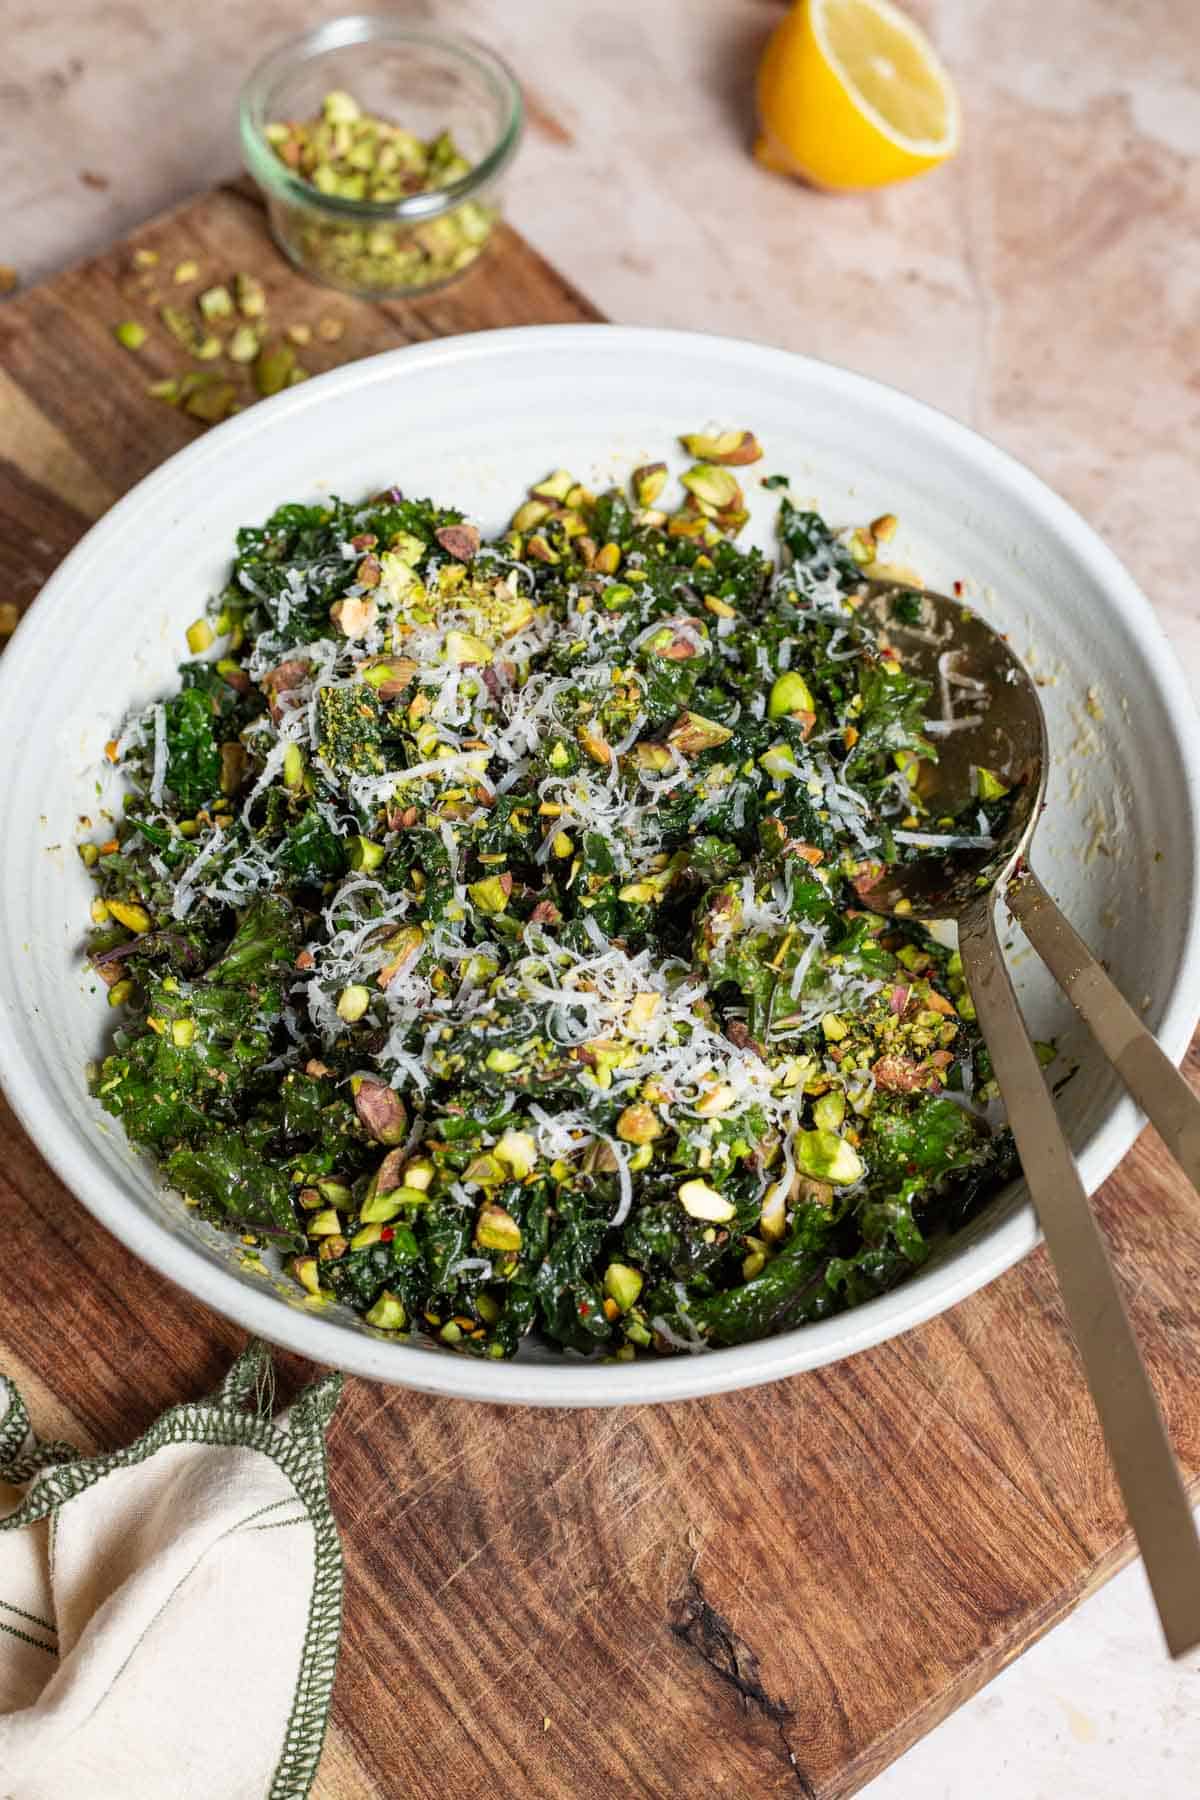 Kale salad in a large bowl with serving utensils on a cutting board. Next to this is a lemon half, a jar of chopped pistachios and a cloth napkin.